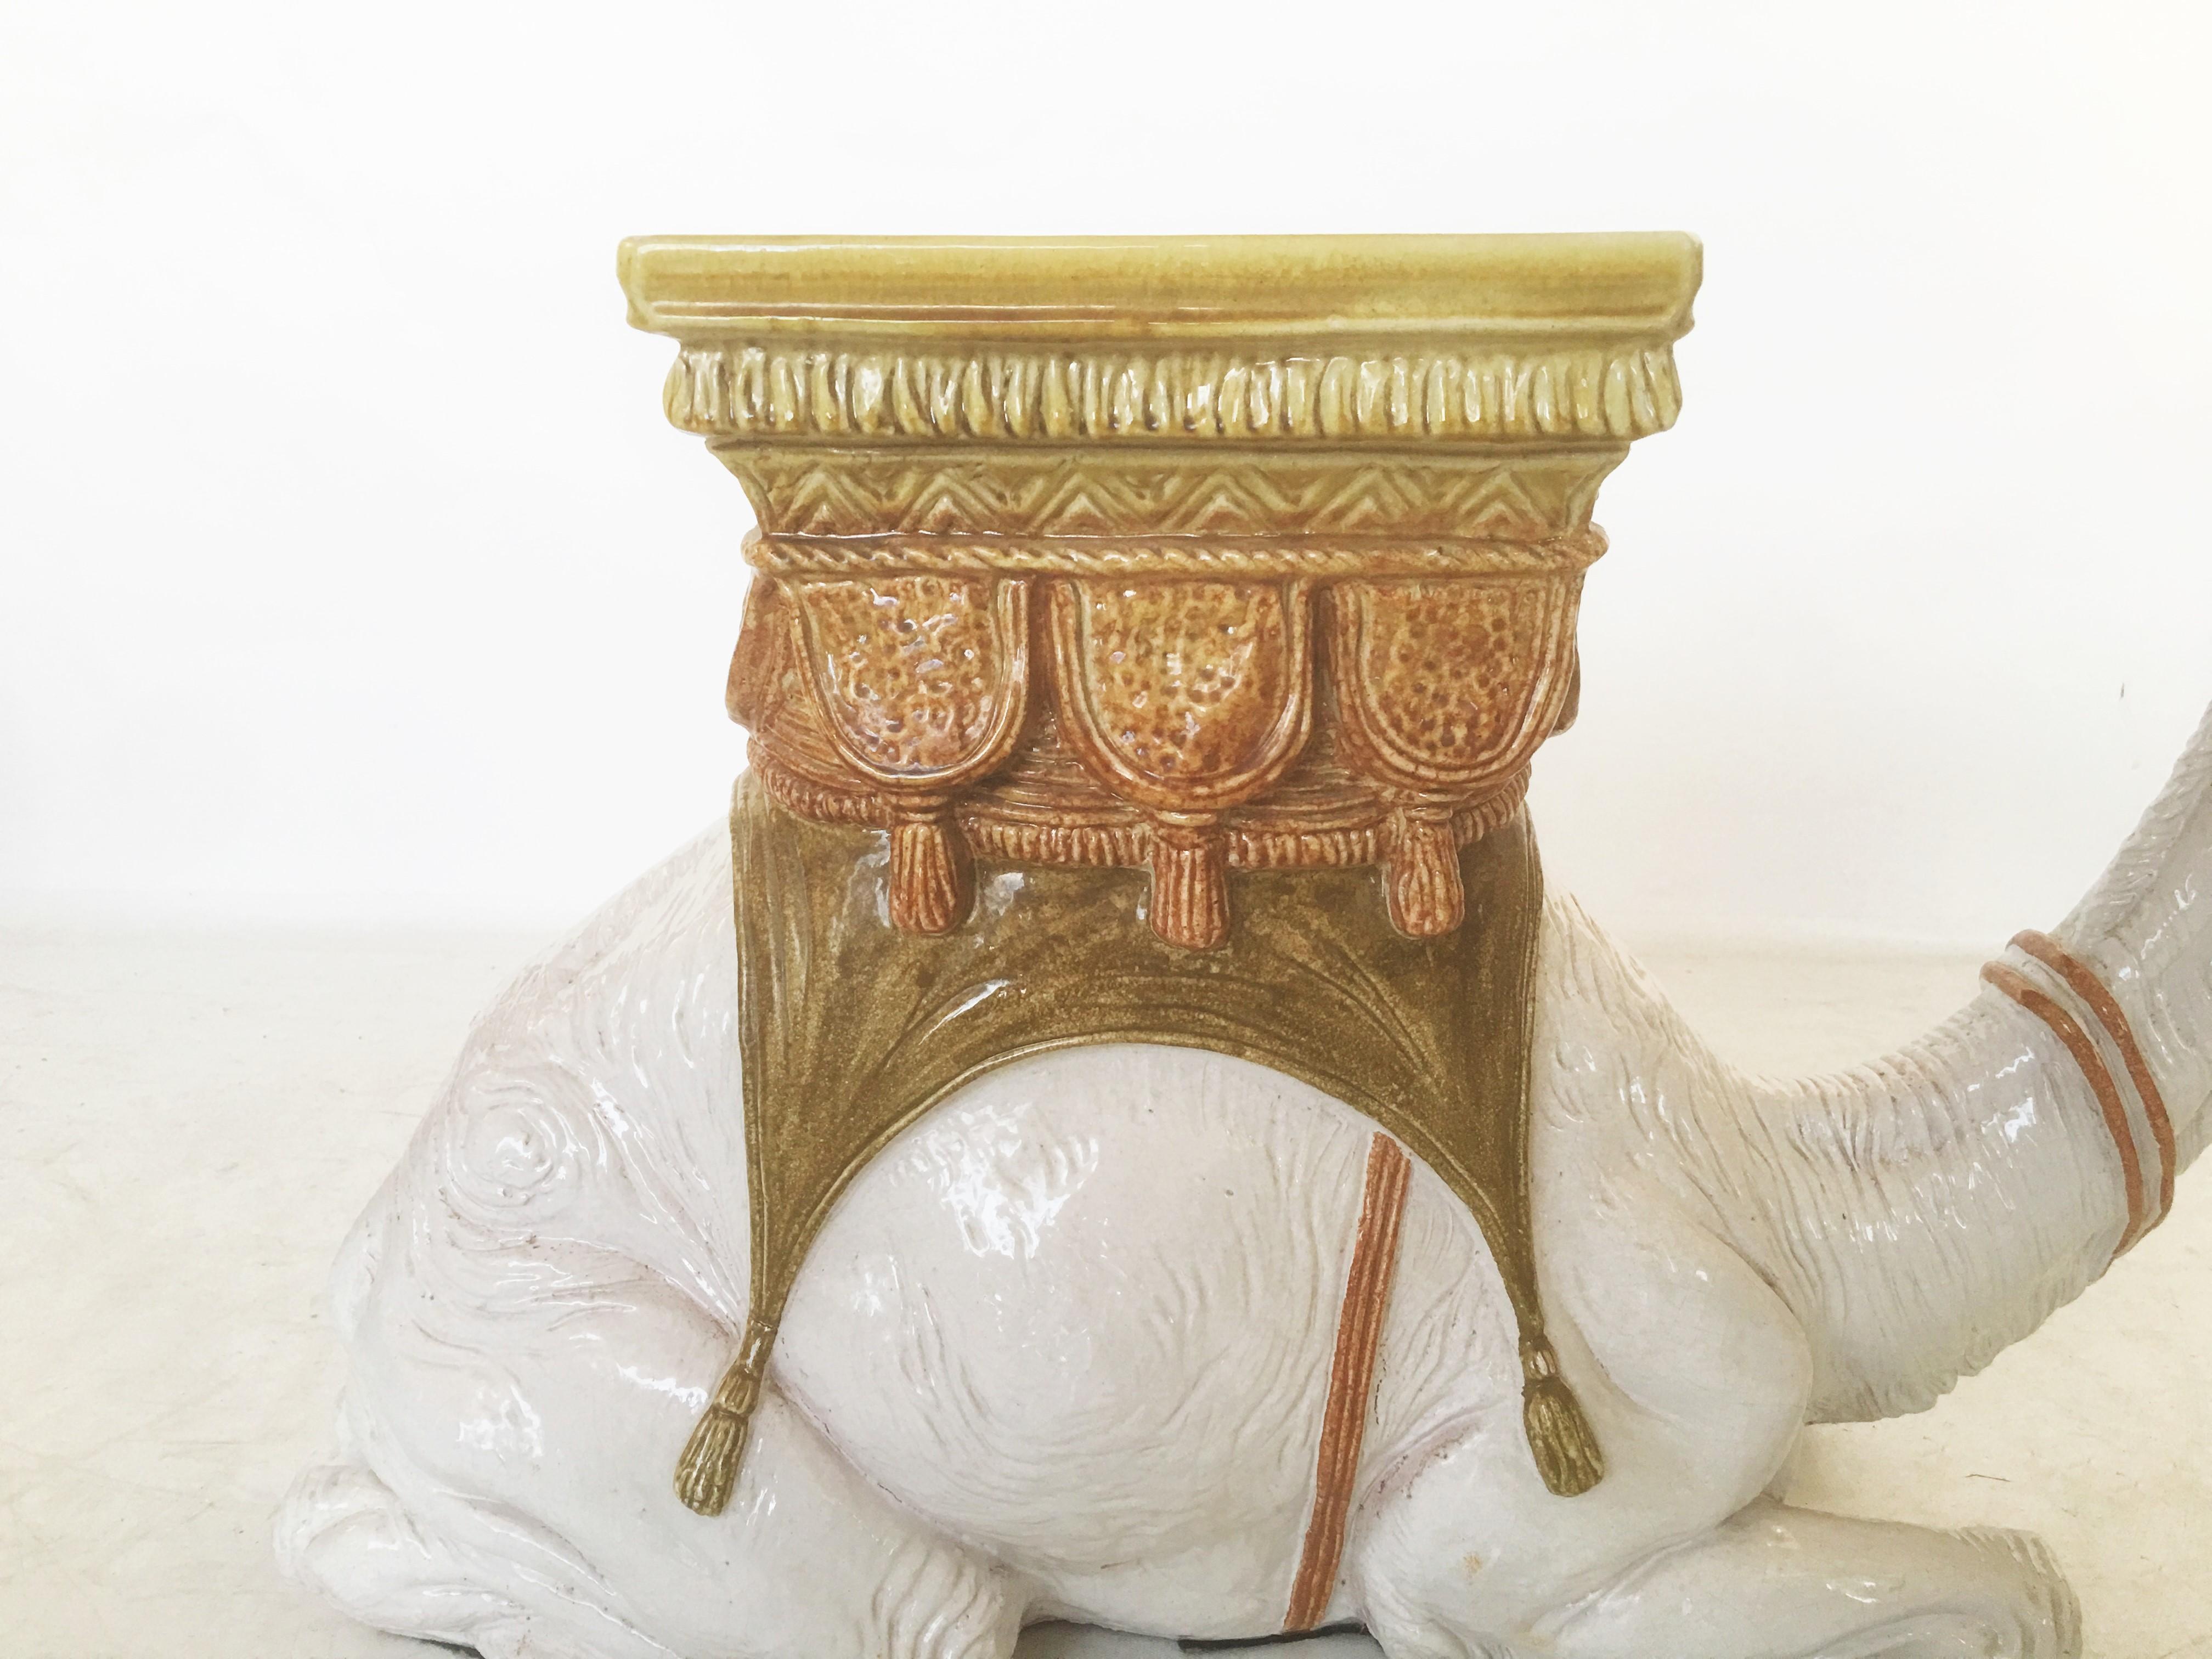 Charming vintage hand painted Italian drinks table or garden seat in the shape of a white kneeling camel. Between its humps is a decorative saddle with yellow, orange and green details. Works well as a side table or even a plant stand. The camel